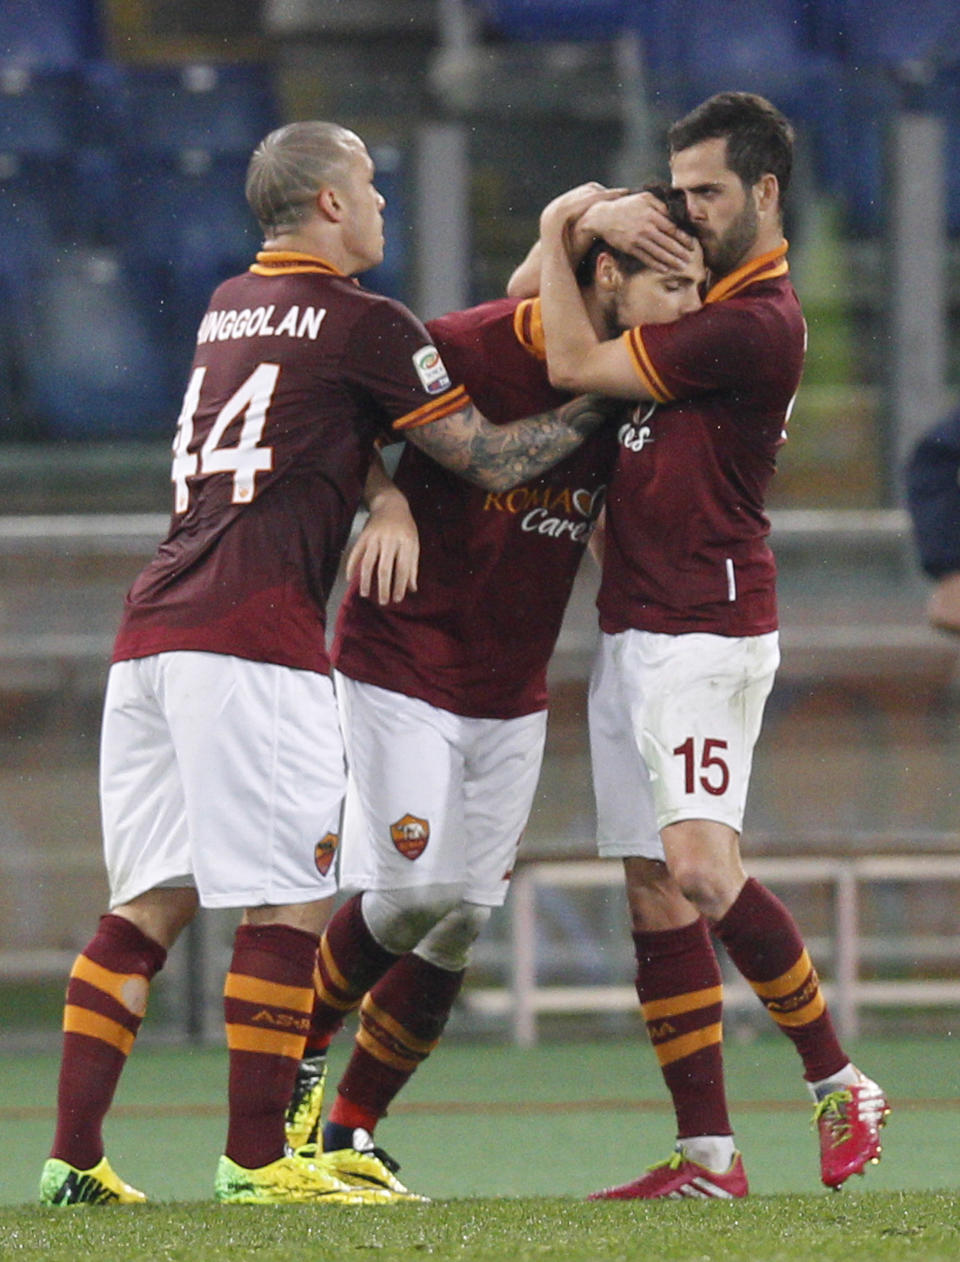 AS Roma forward Mattia Destro center, is celebrated by his teammates Radja Nainggolan of Belgium, left, and Miralem Pjanic of Bosnia-Erzegovina after he scored during a Serie A soccer match between AS Roma and Torino, at Rome's Olympic Stadium, Tuesday, March 25, 2014. (AP Photo/Andrew Medichini)